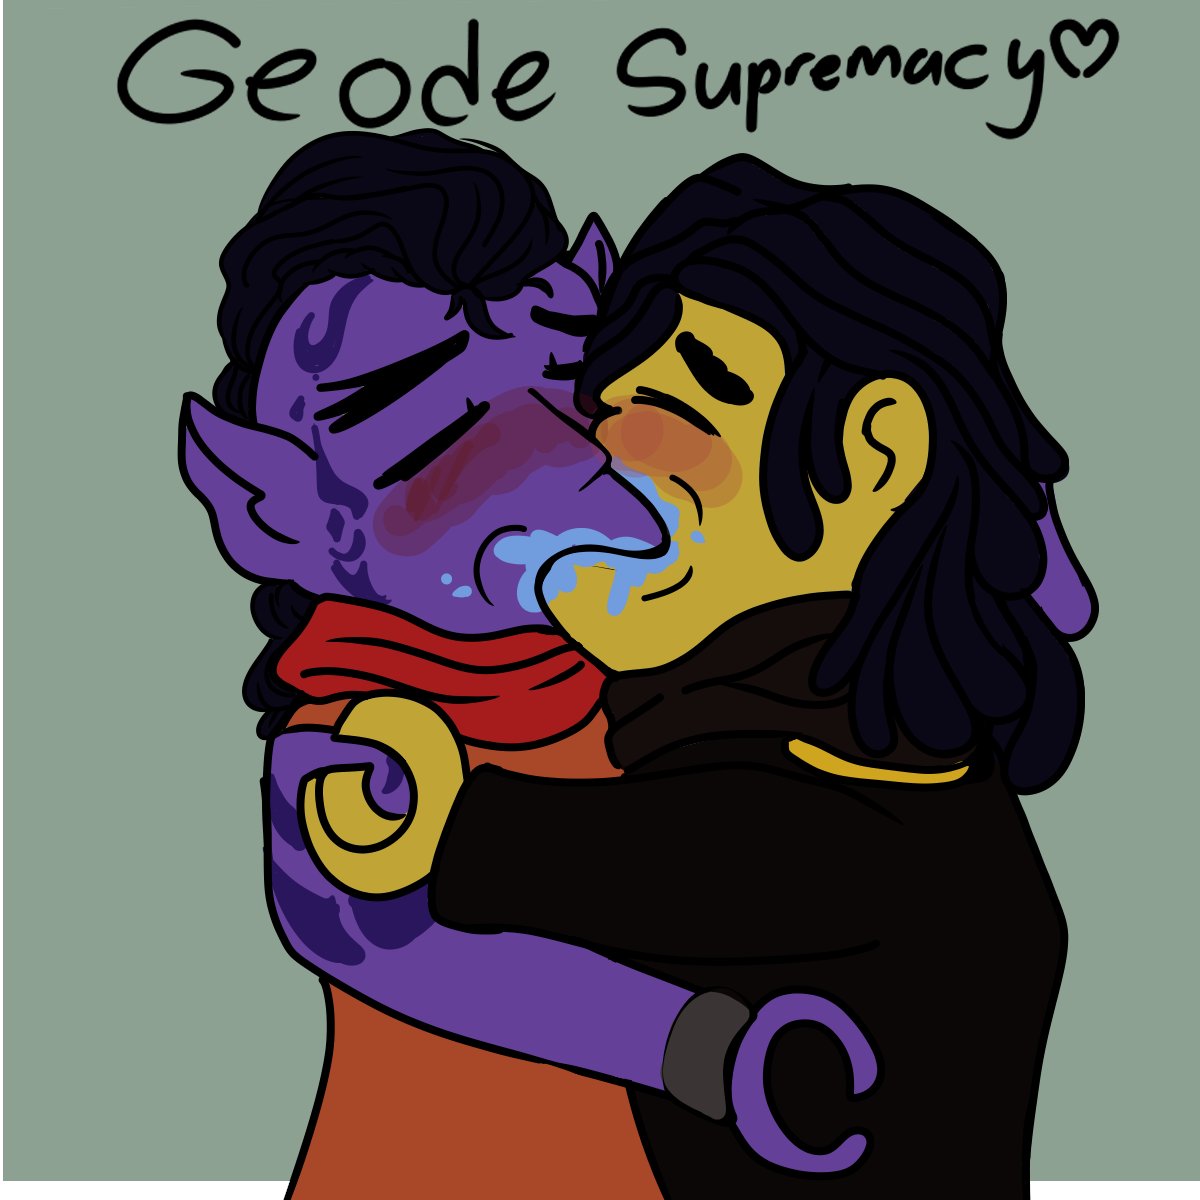 #savemyboycole from the Homophobes 🙏🏳️‍🌈
.
.
.
.
.
.
Anyways Geode is amazing